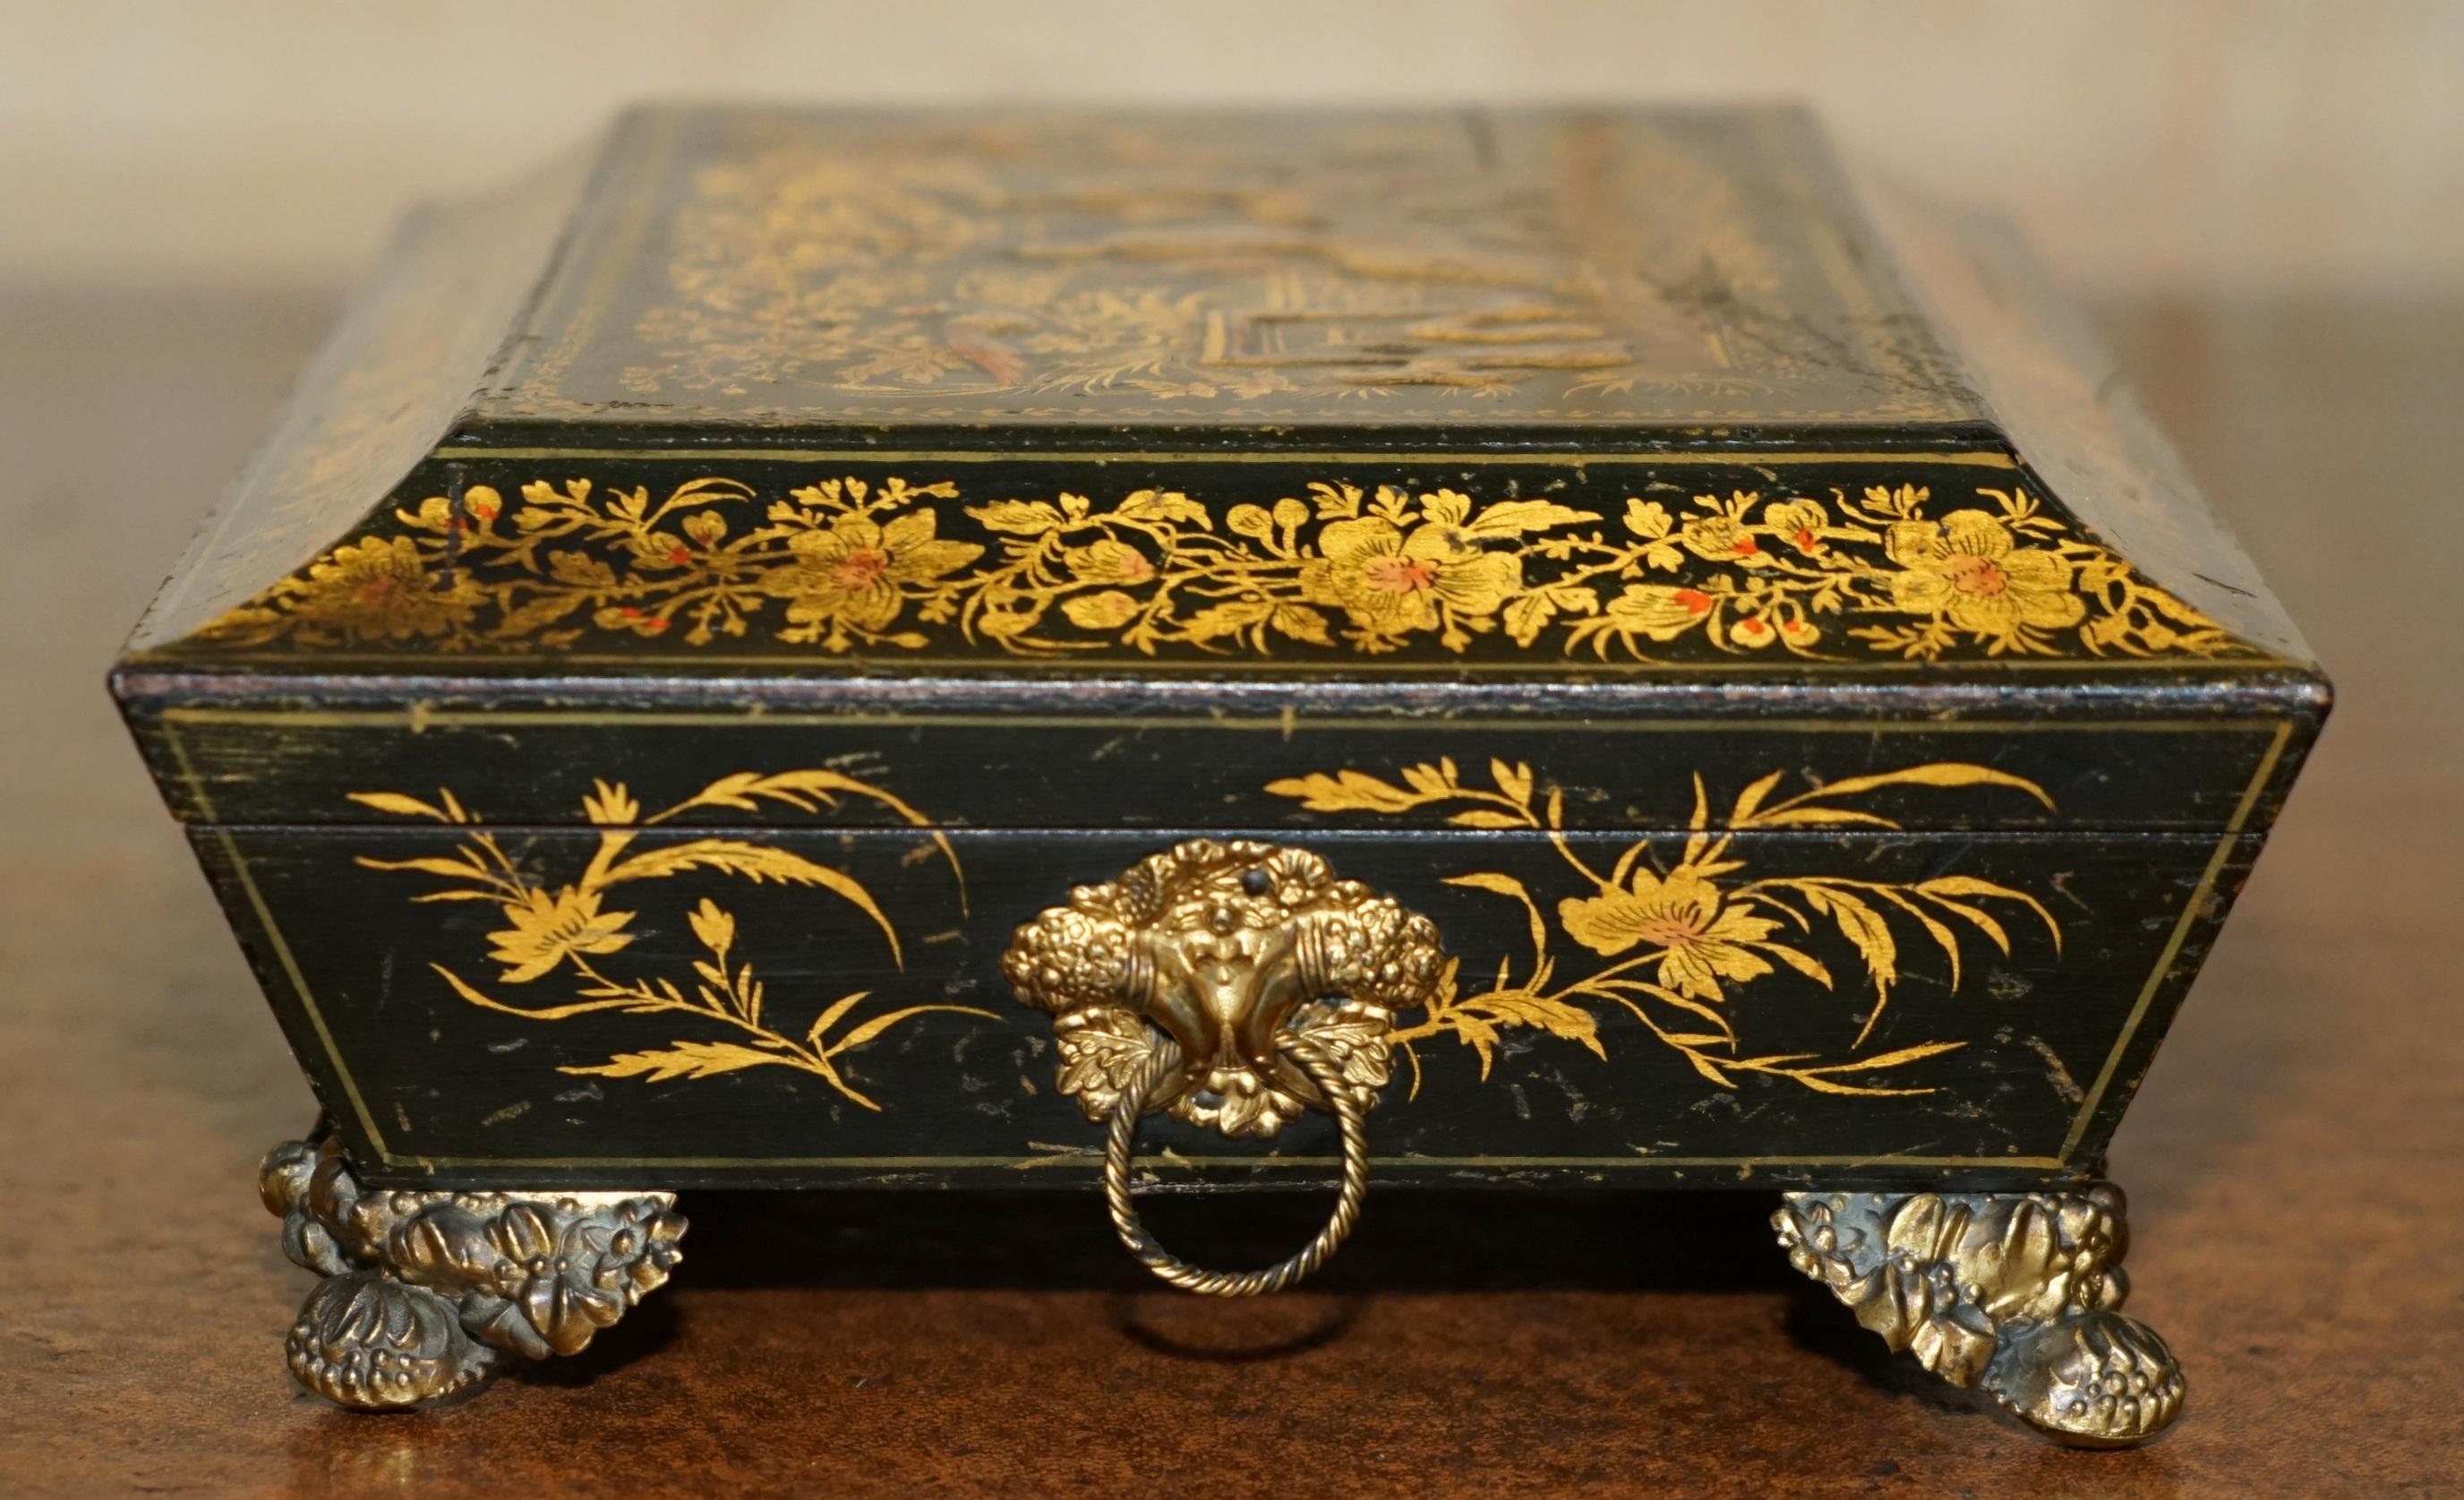 SUBLIME ANTIQUE ENGLiSH GEORGIAN 1820 CHINESE CHINOISERIE PENWORK JEWELLERY BOX For Sale 5